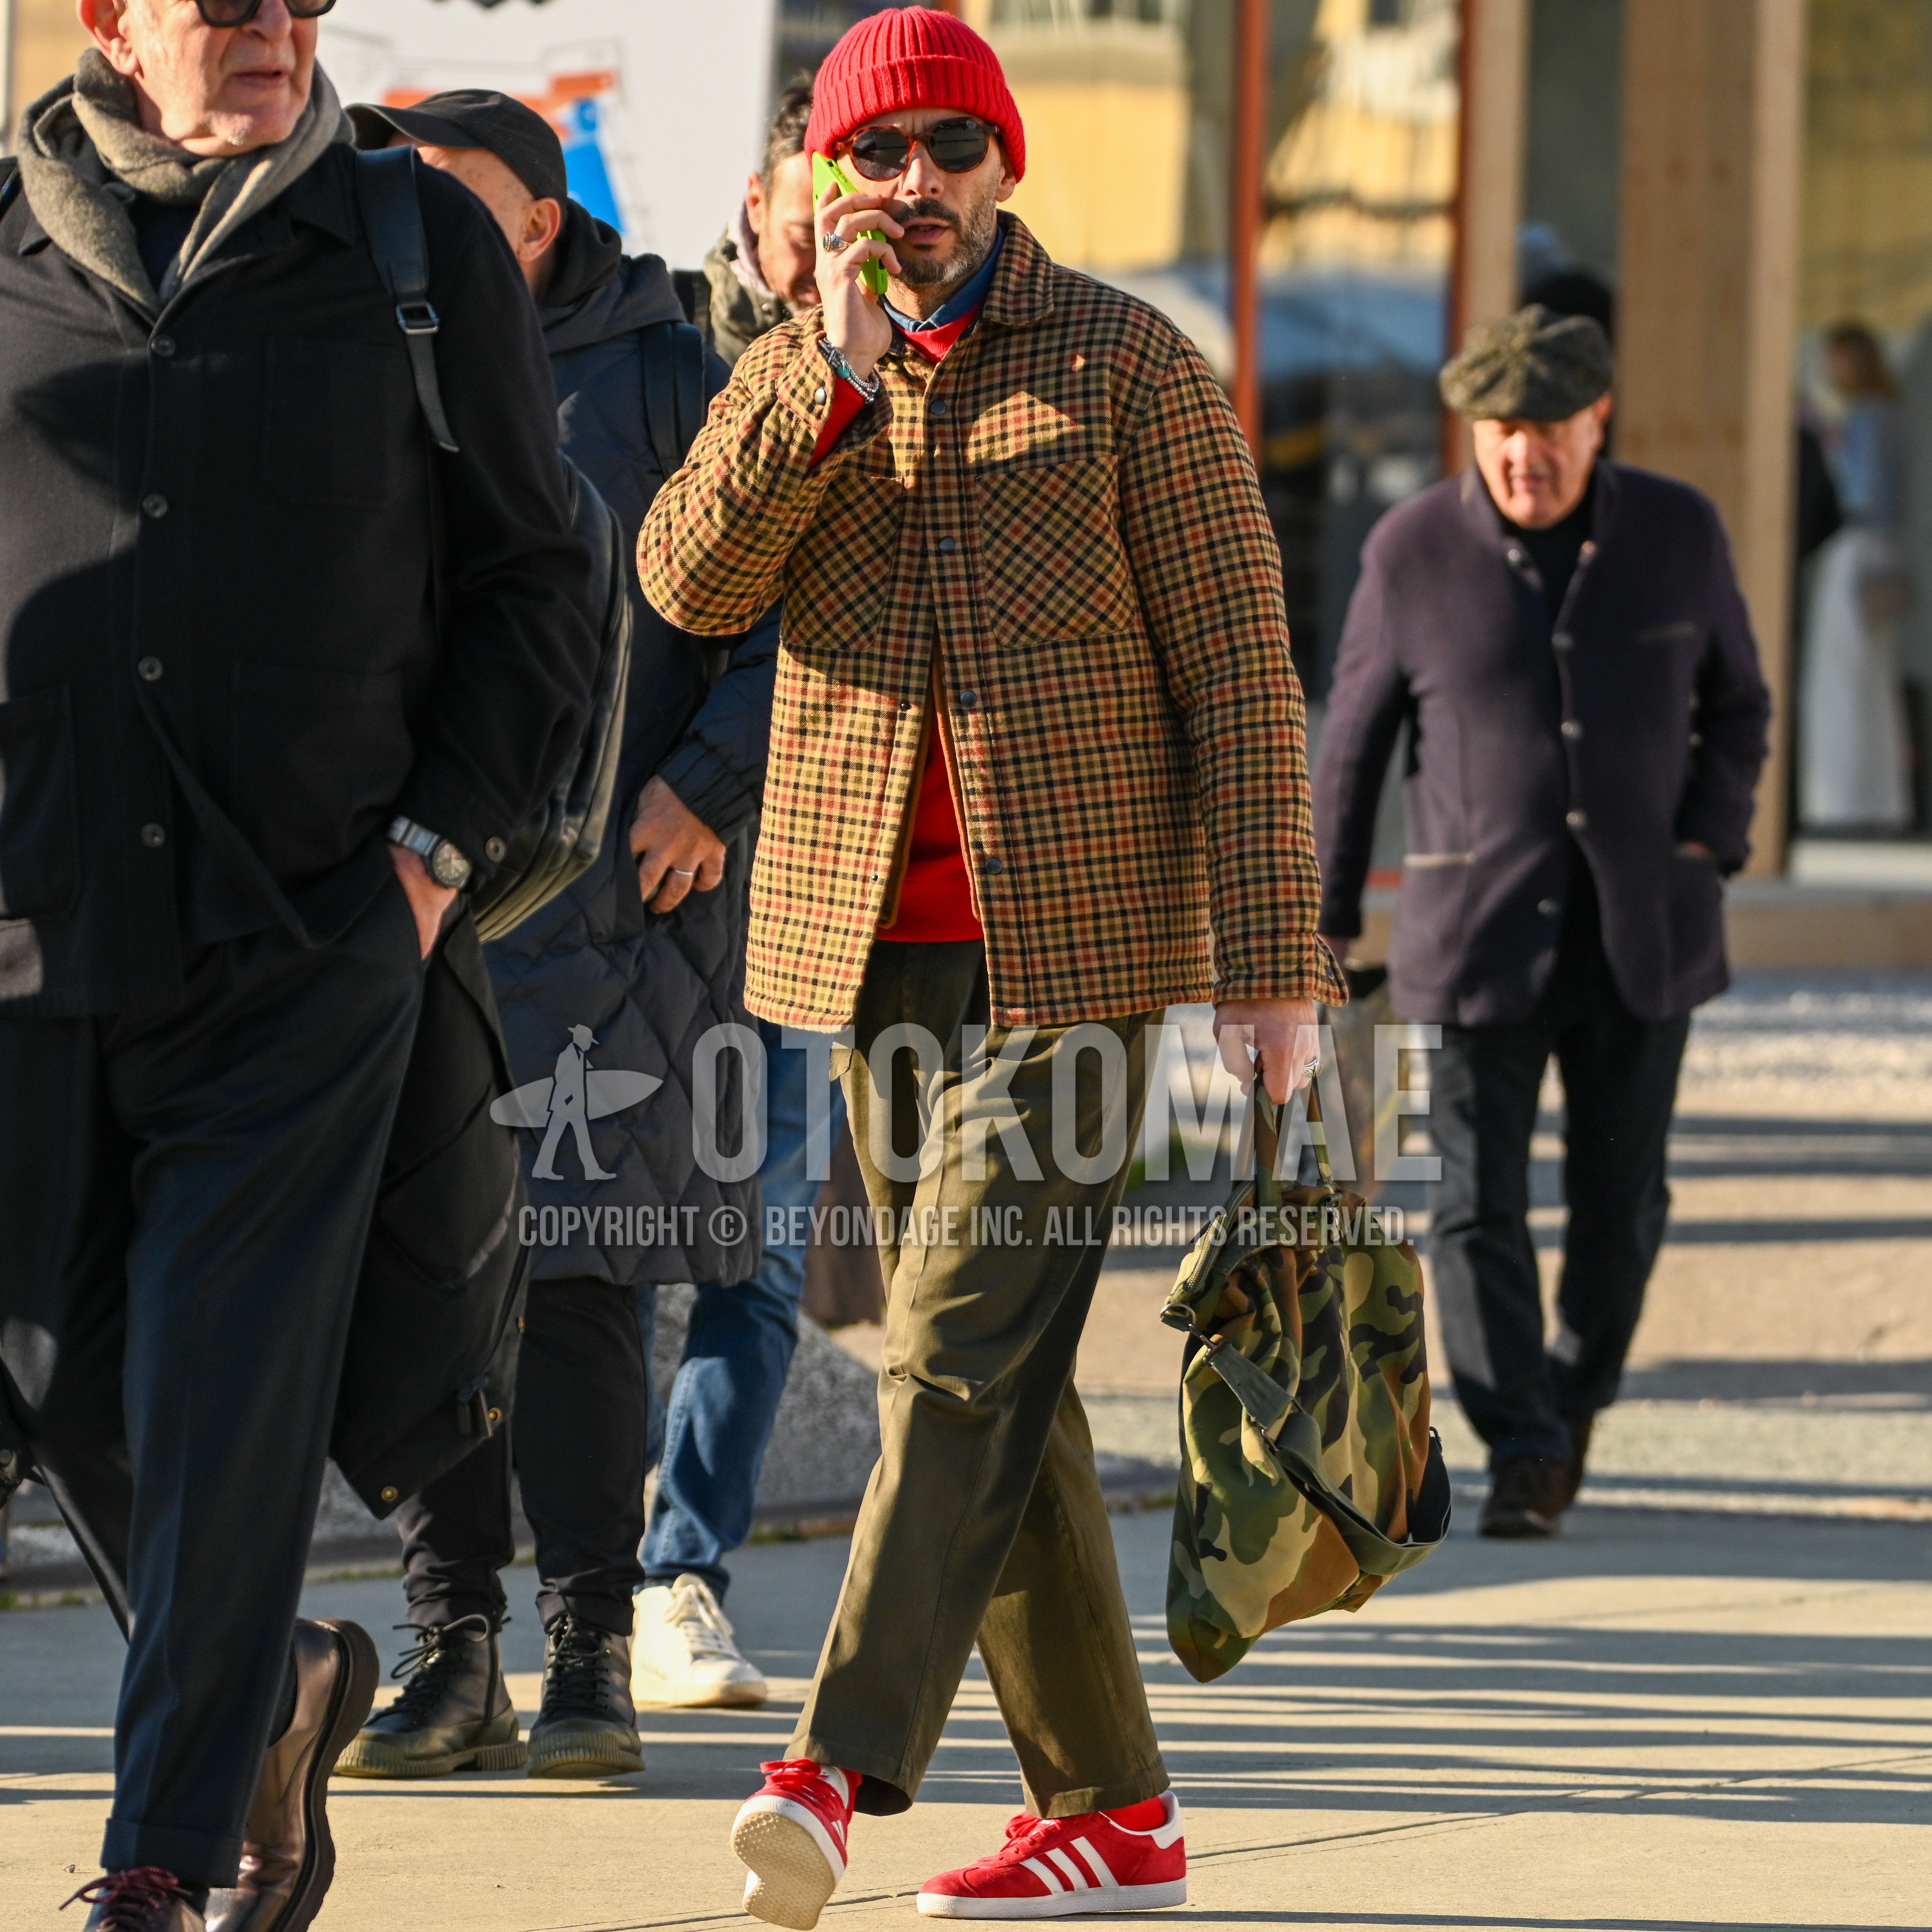 Men's autumn winter outfit with red plain knit cap, tortoiseshell sunglasses, brown check coverall, plain denim shirt/chambray shirt, red plain sweatshirt, olive green plain chinos, red plain socks, red low-cut sneakers, camouflage briefcase/handbag.